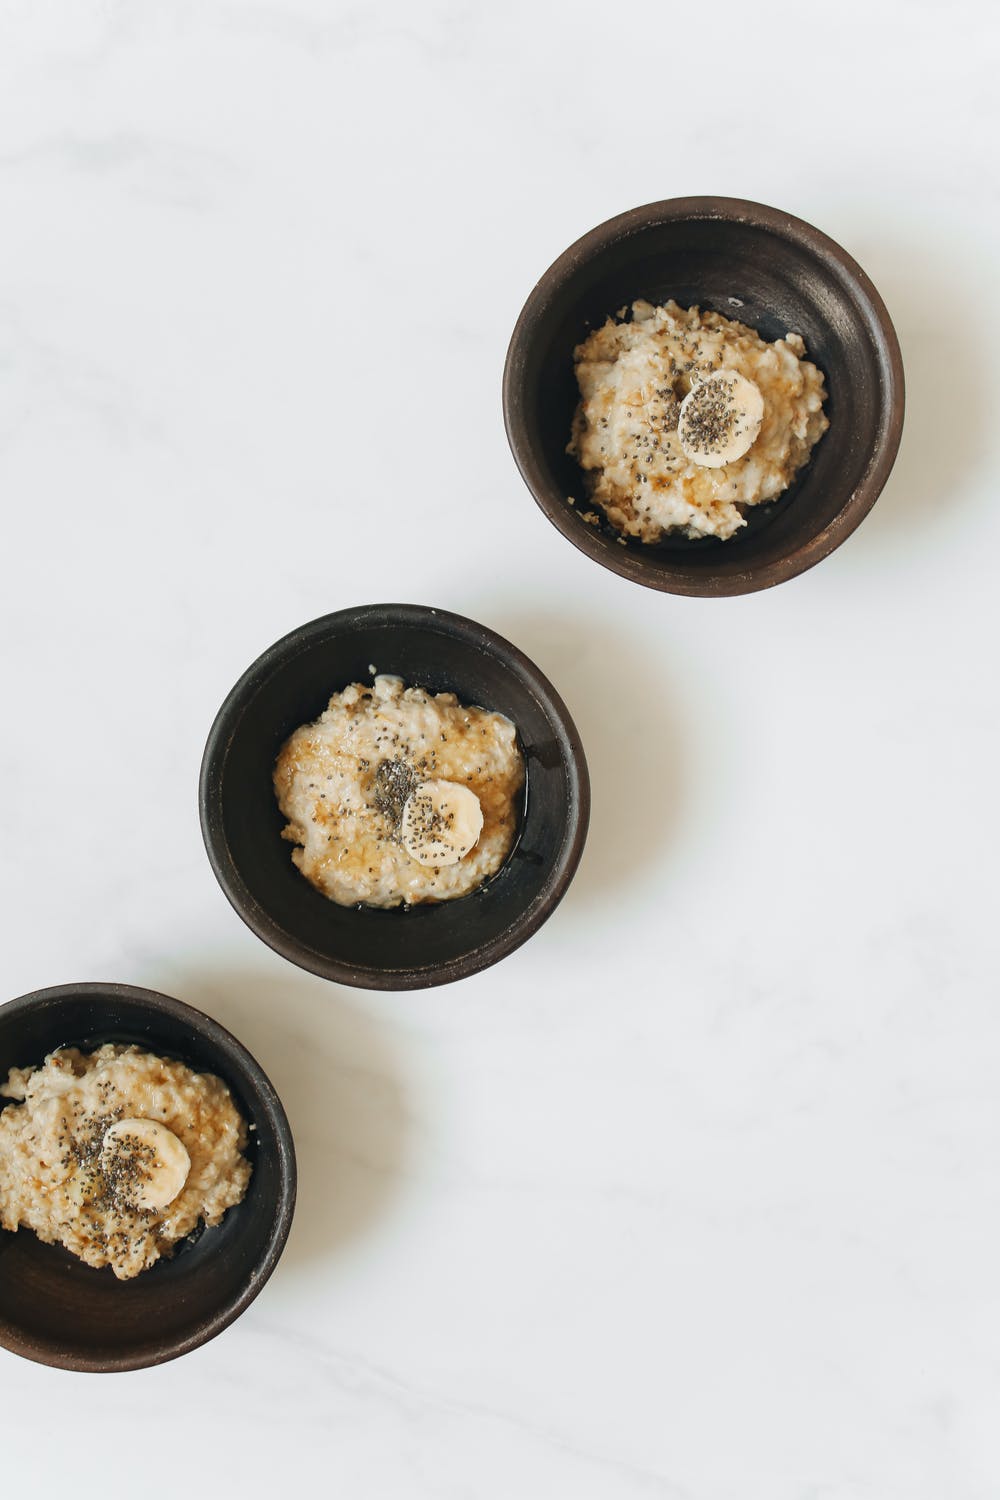 Can you eat overnight oats on a low carb diet?